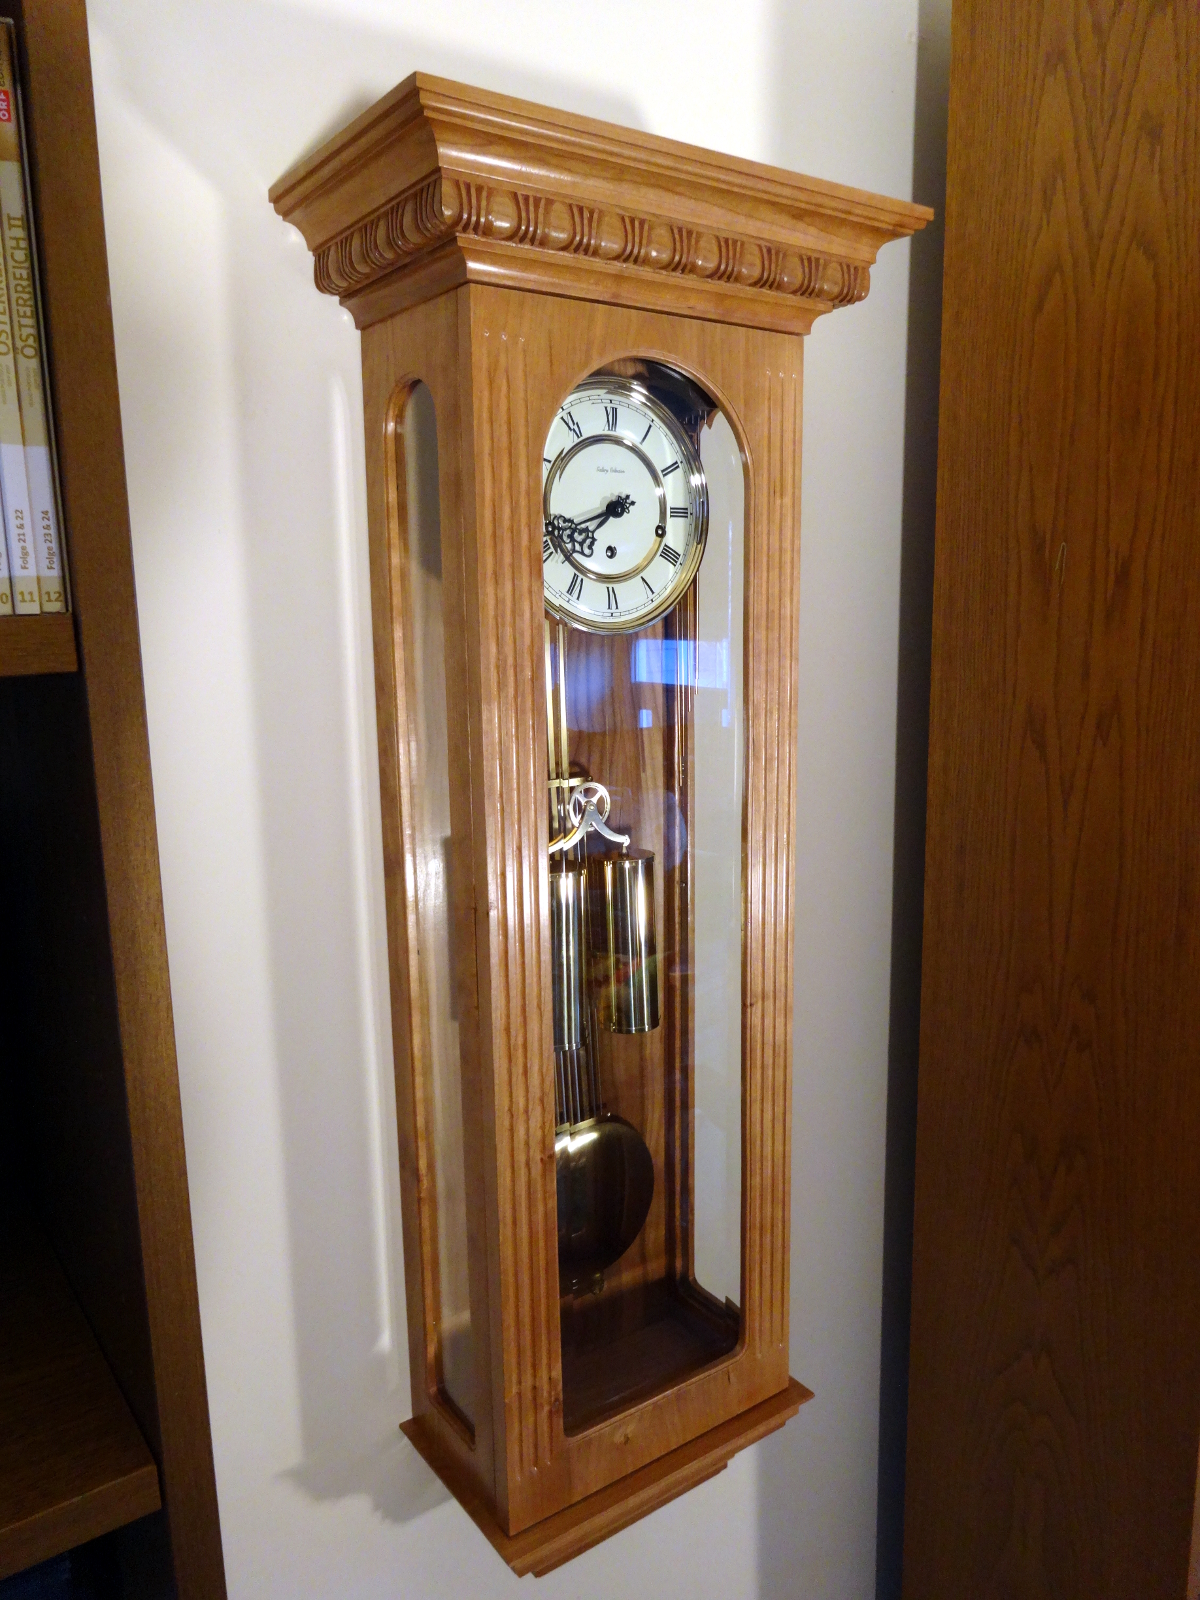 photo of the regulator clock from left side